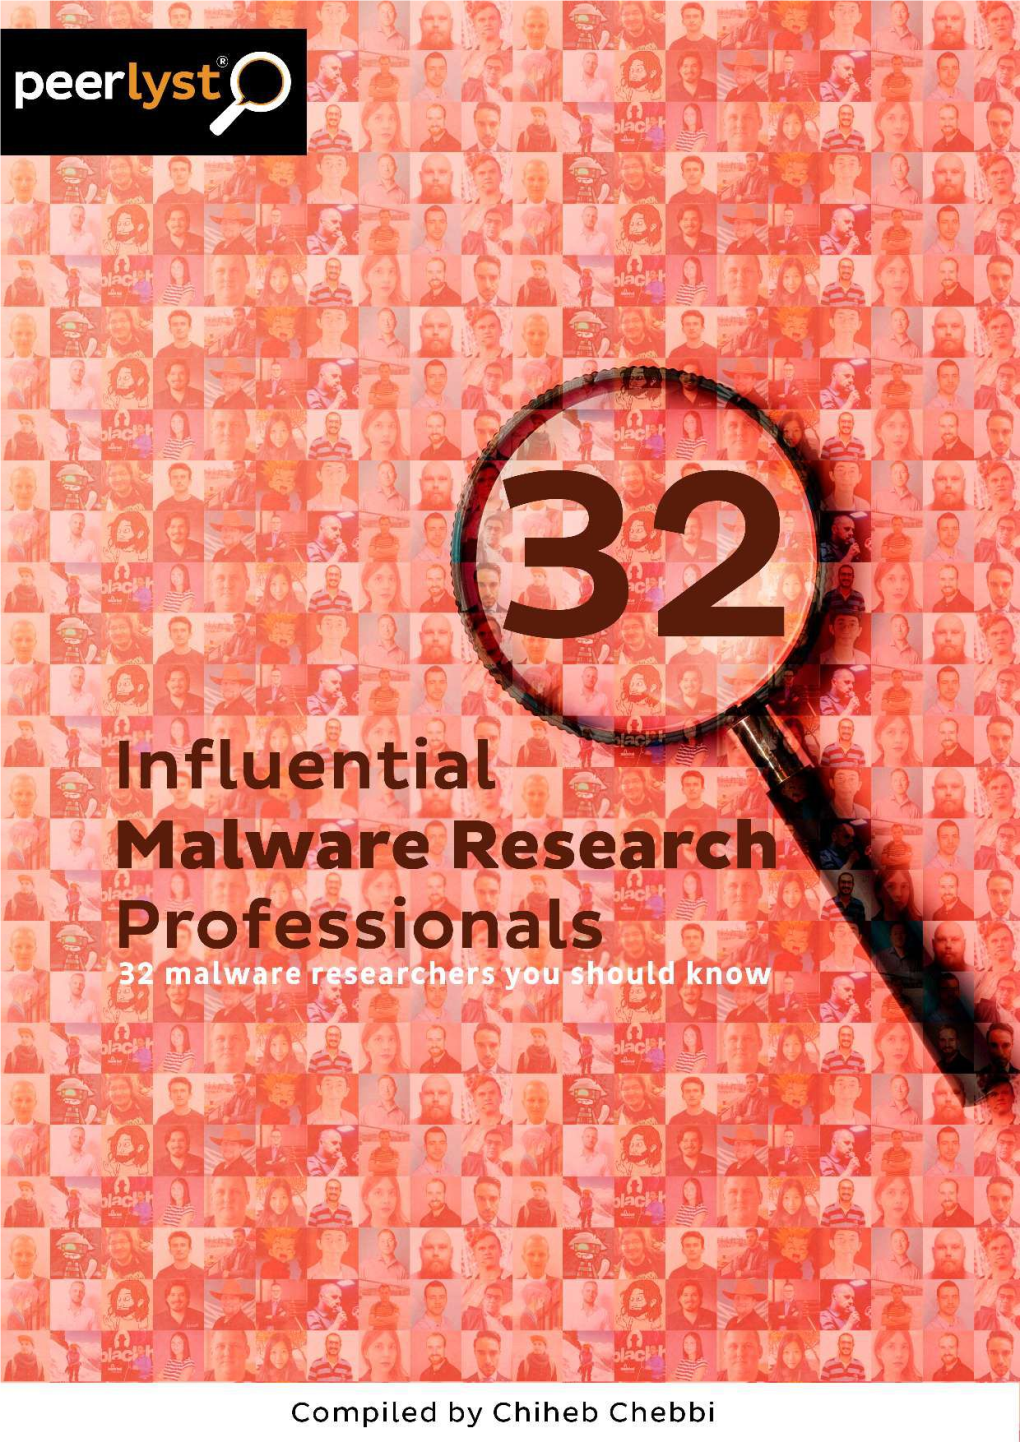 32 Influential Malware Research Professionals